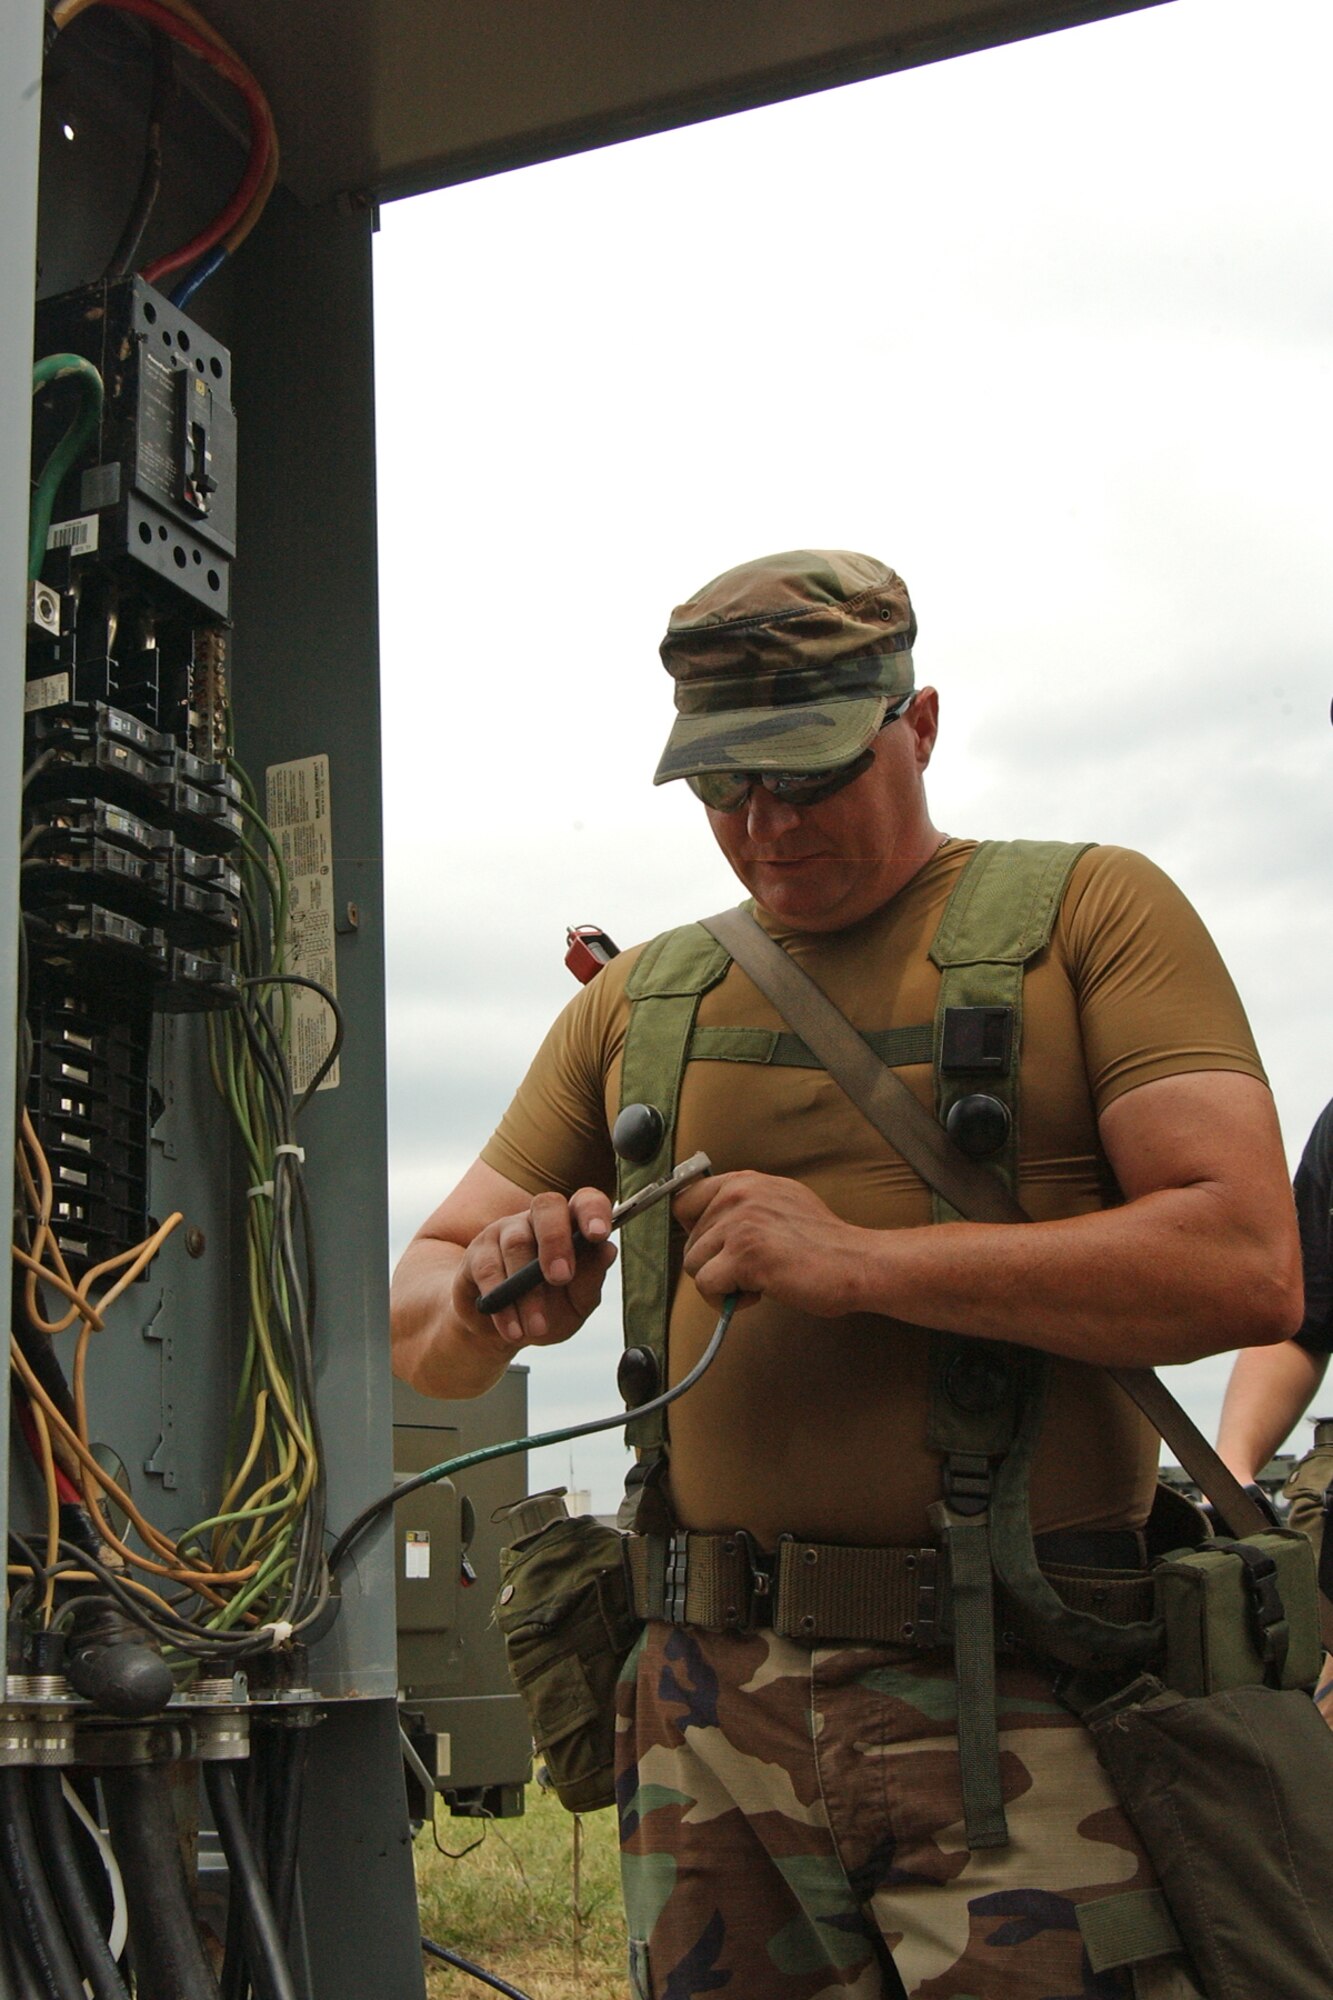 Senior Airman Kevin McDoniel, a 189th Civil Engineering Squadron electrician, works wiring for the Guard’s weekend exercise called Hog Heaven. (Photo by Master Sgt. Dianna Seerey)